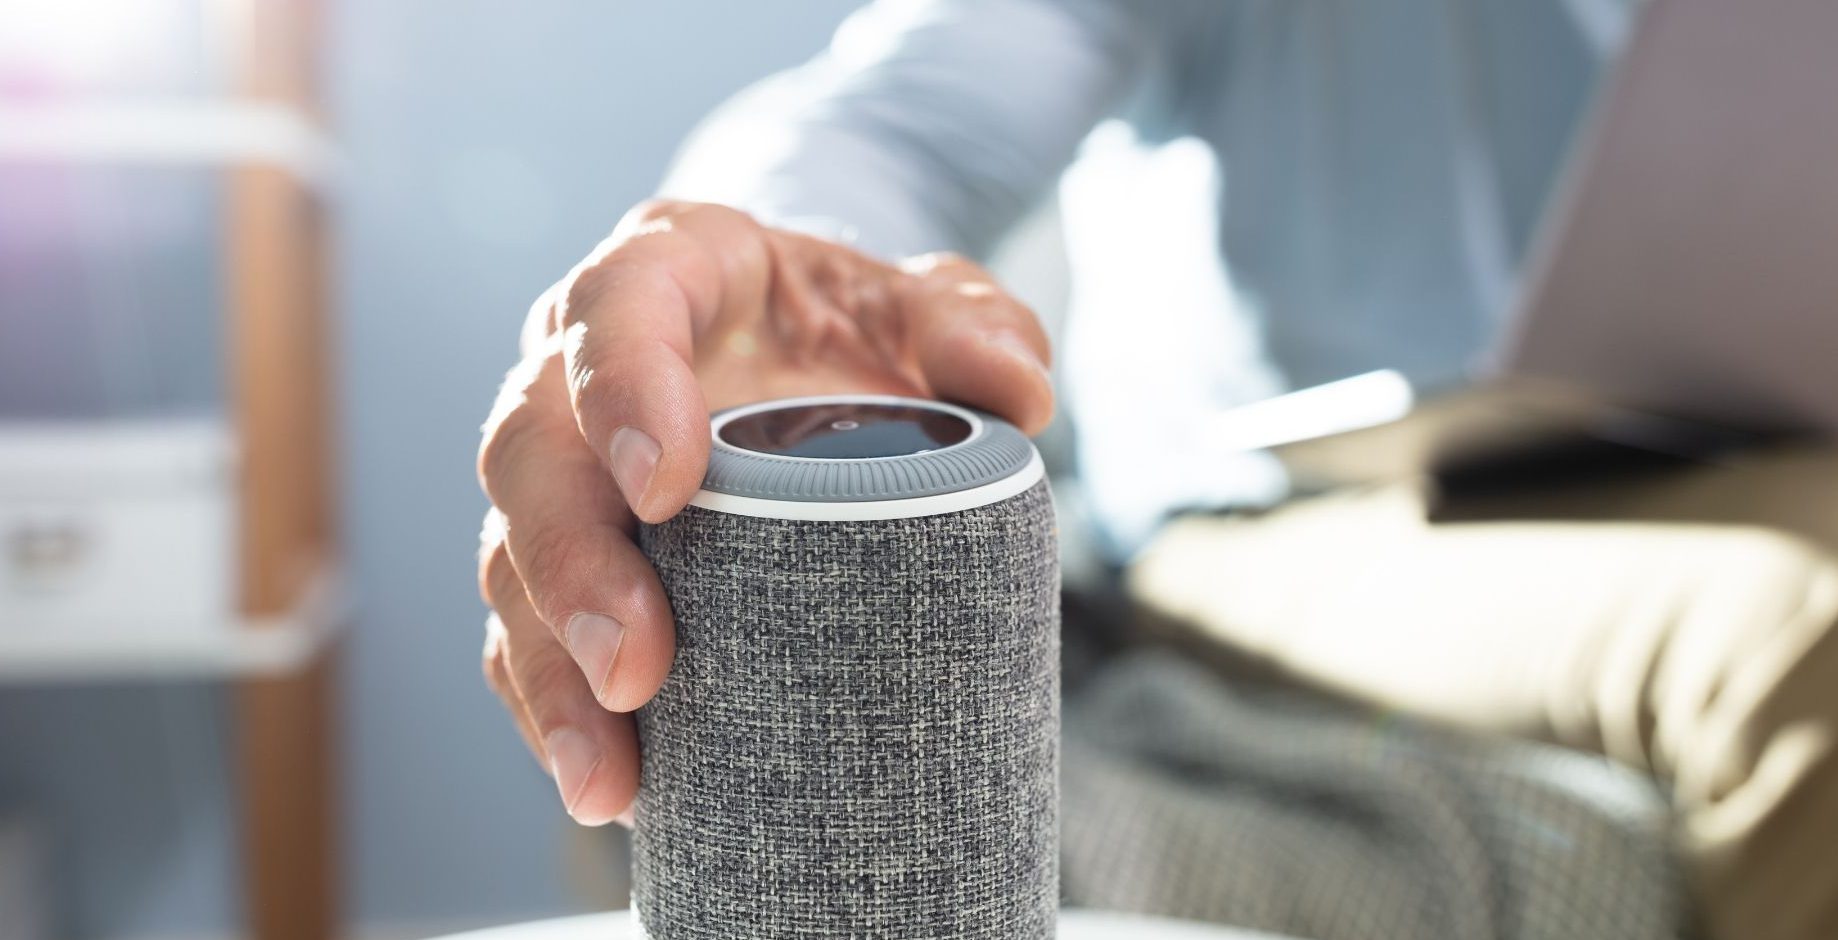 Global Wireless Speakers Market Overview And Prospects